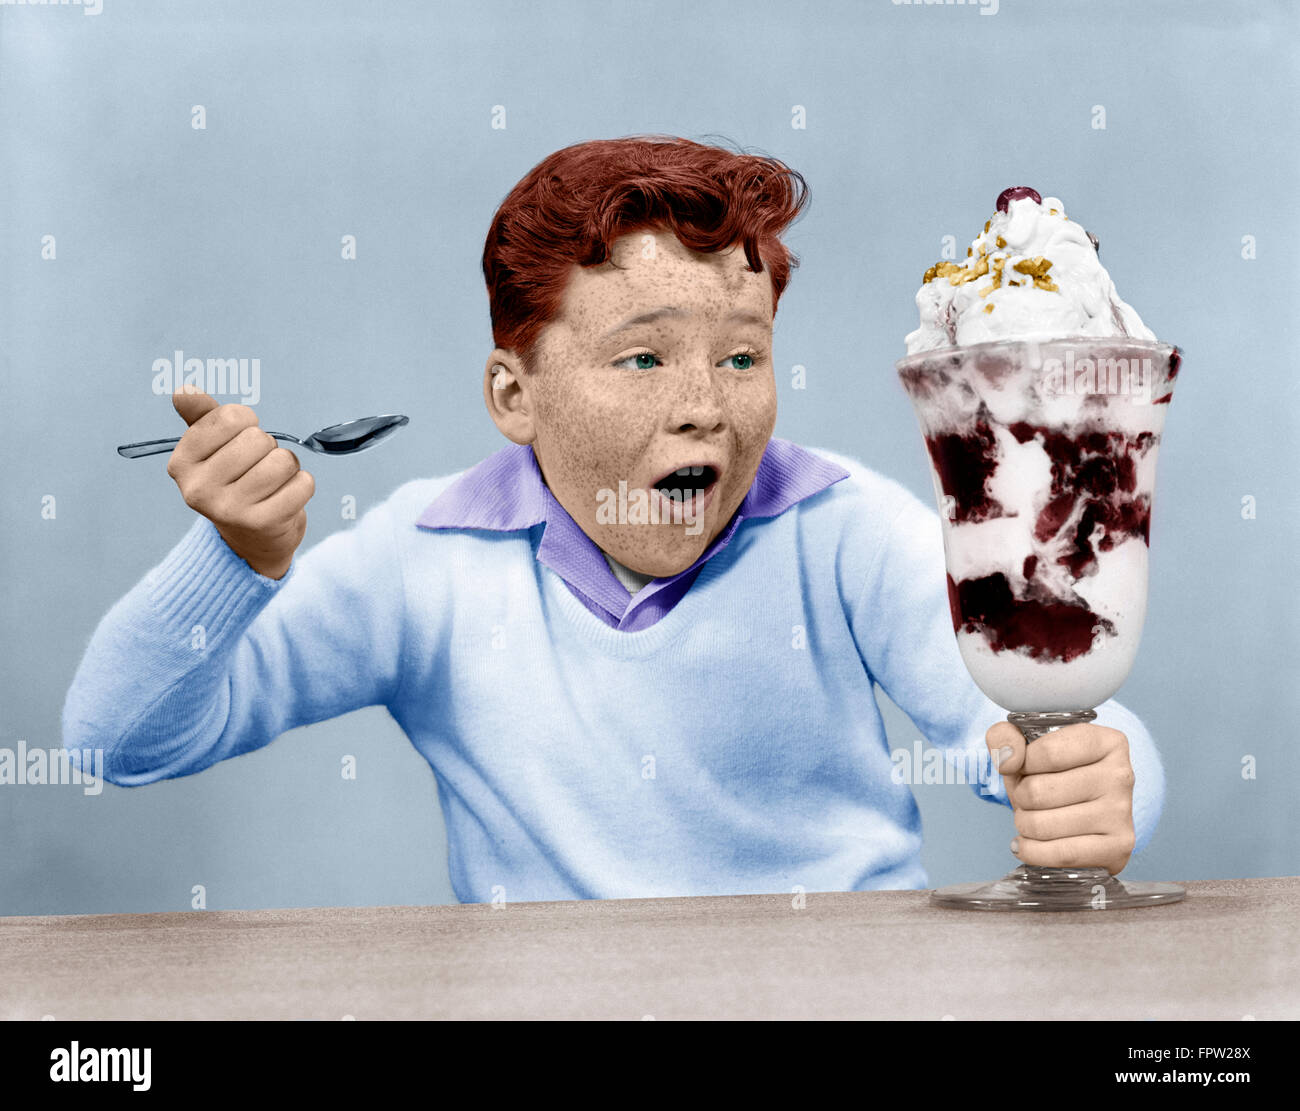 1950s FRECKLE FACE BOY DIGGING INTO GIANT ICE CREAM SUNDAE Stock Photo